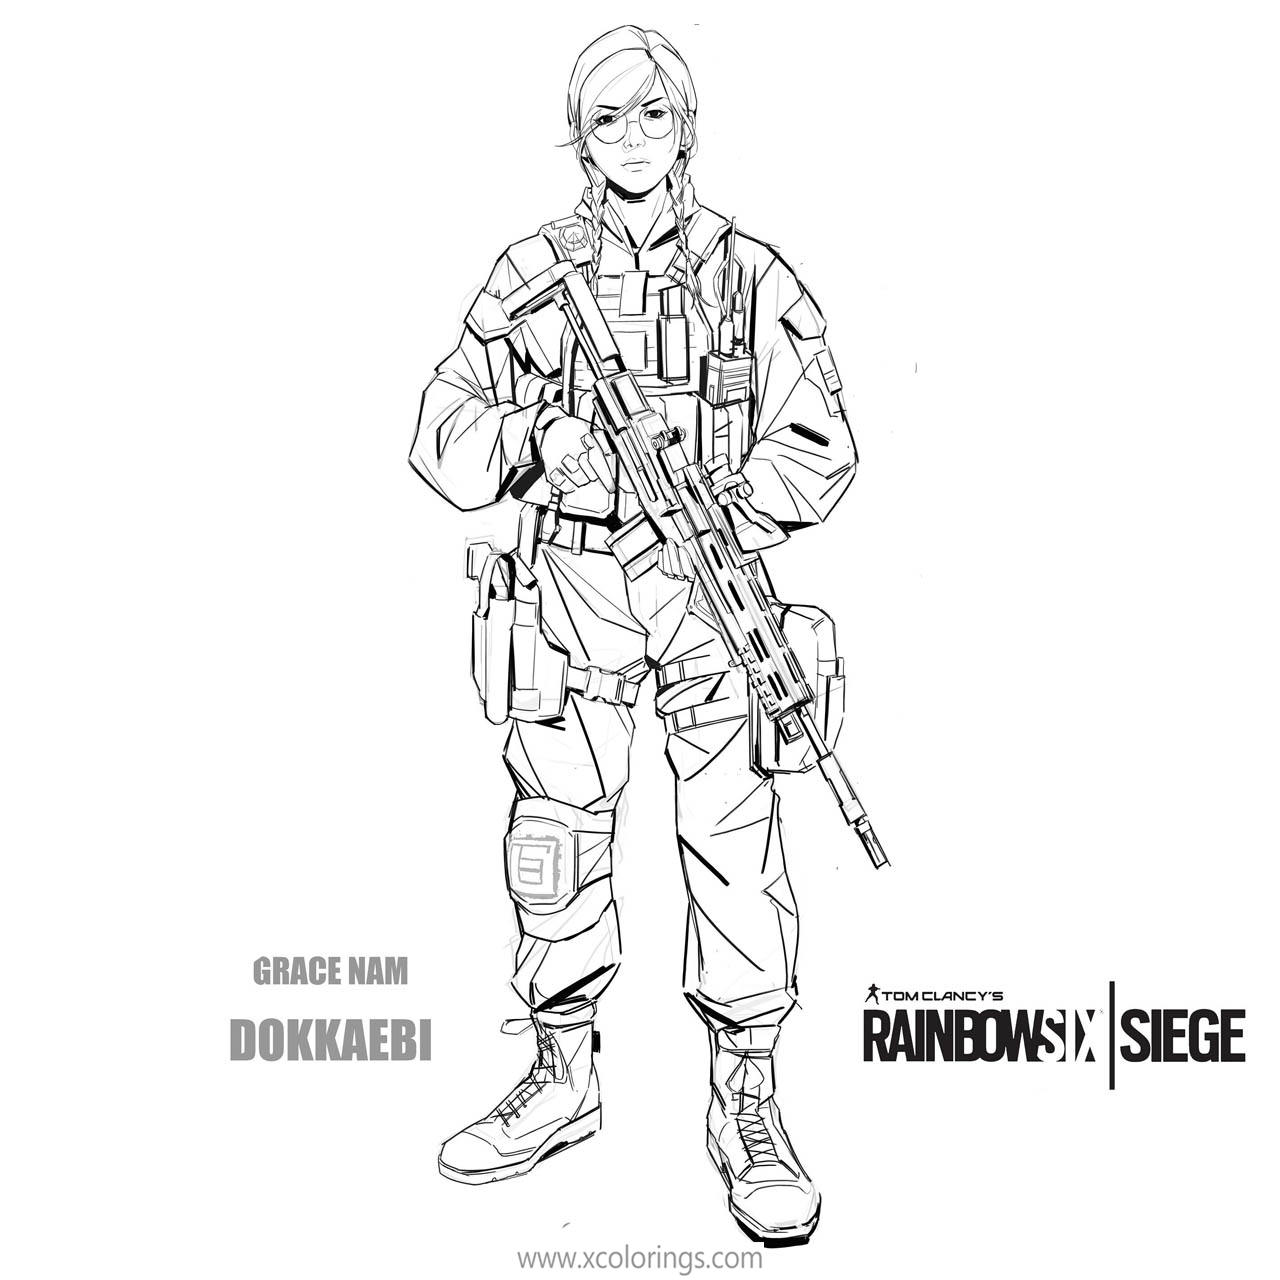 Free Rainbow Six Siege Coloring Pages Fan Fiction printable